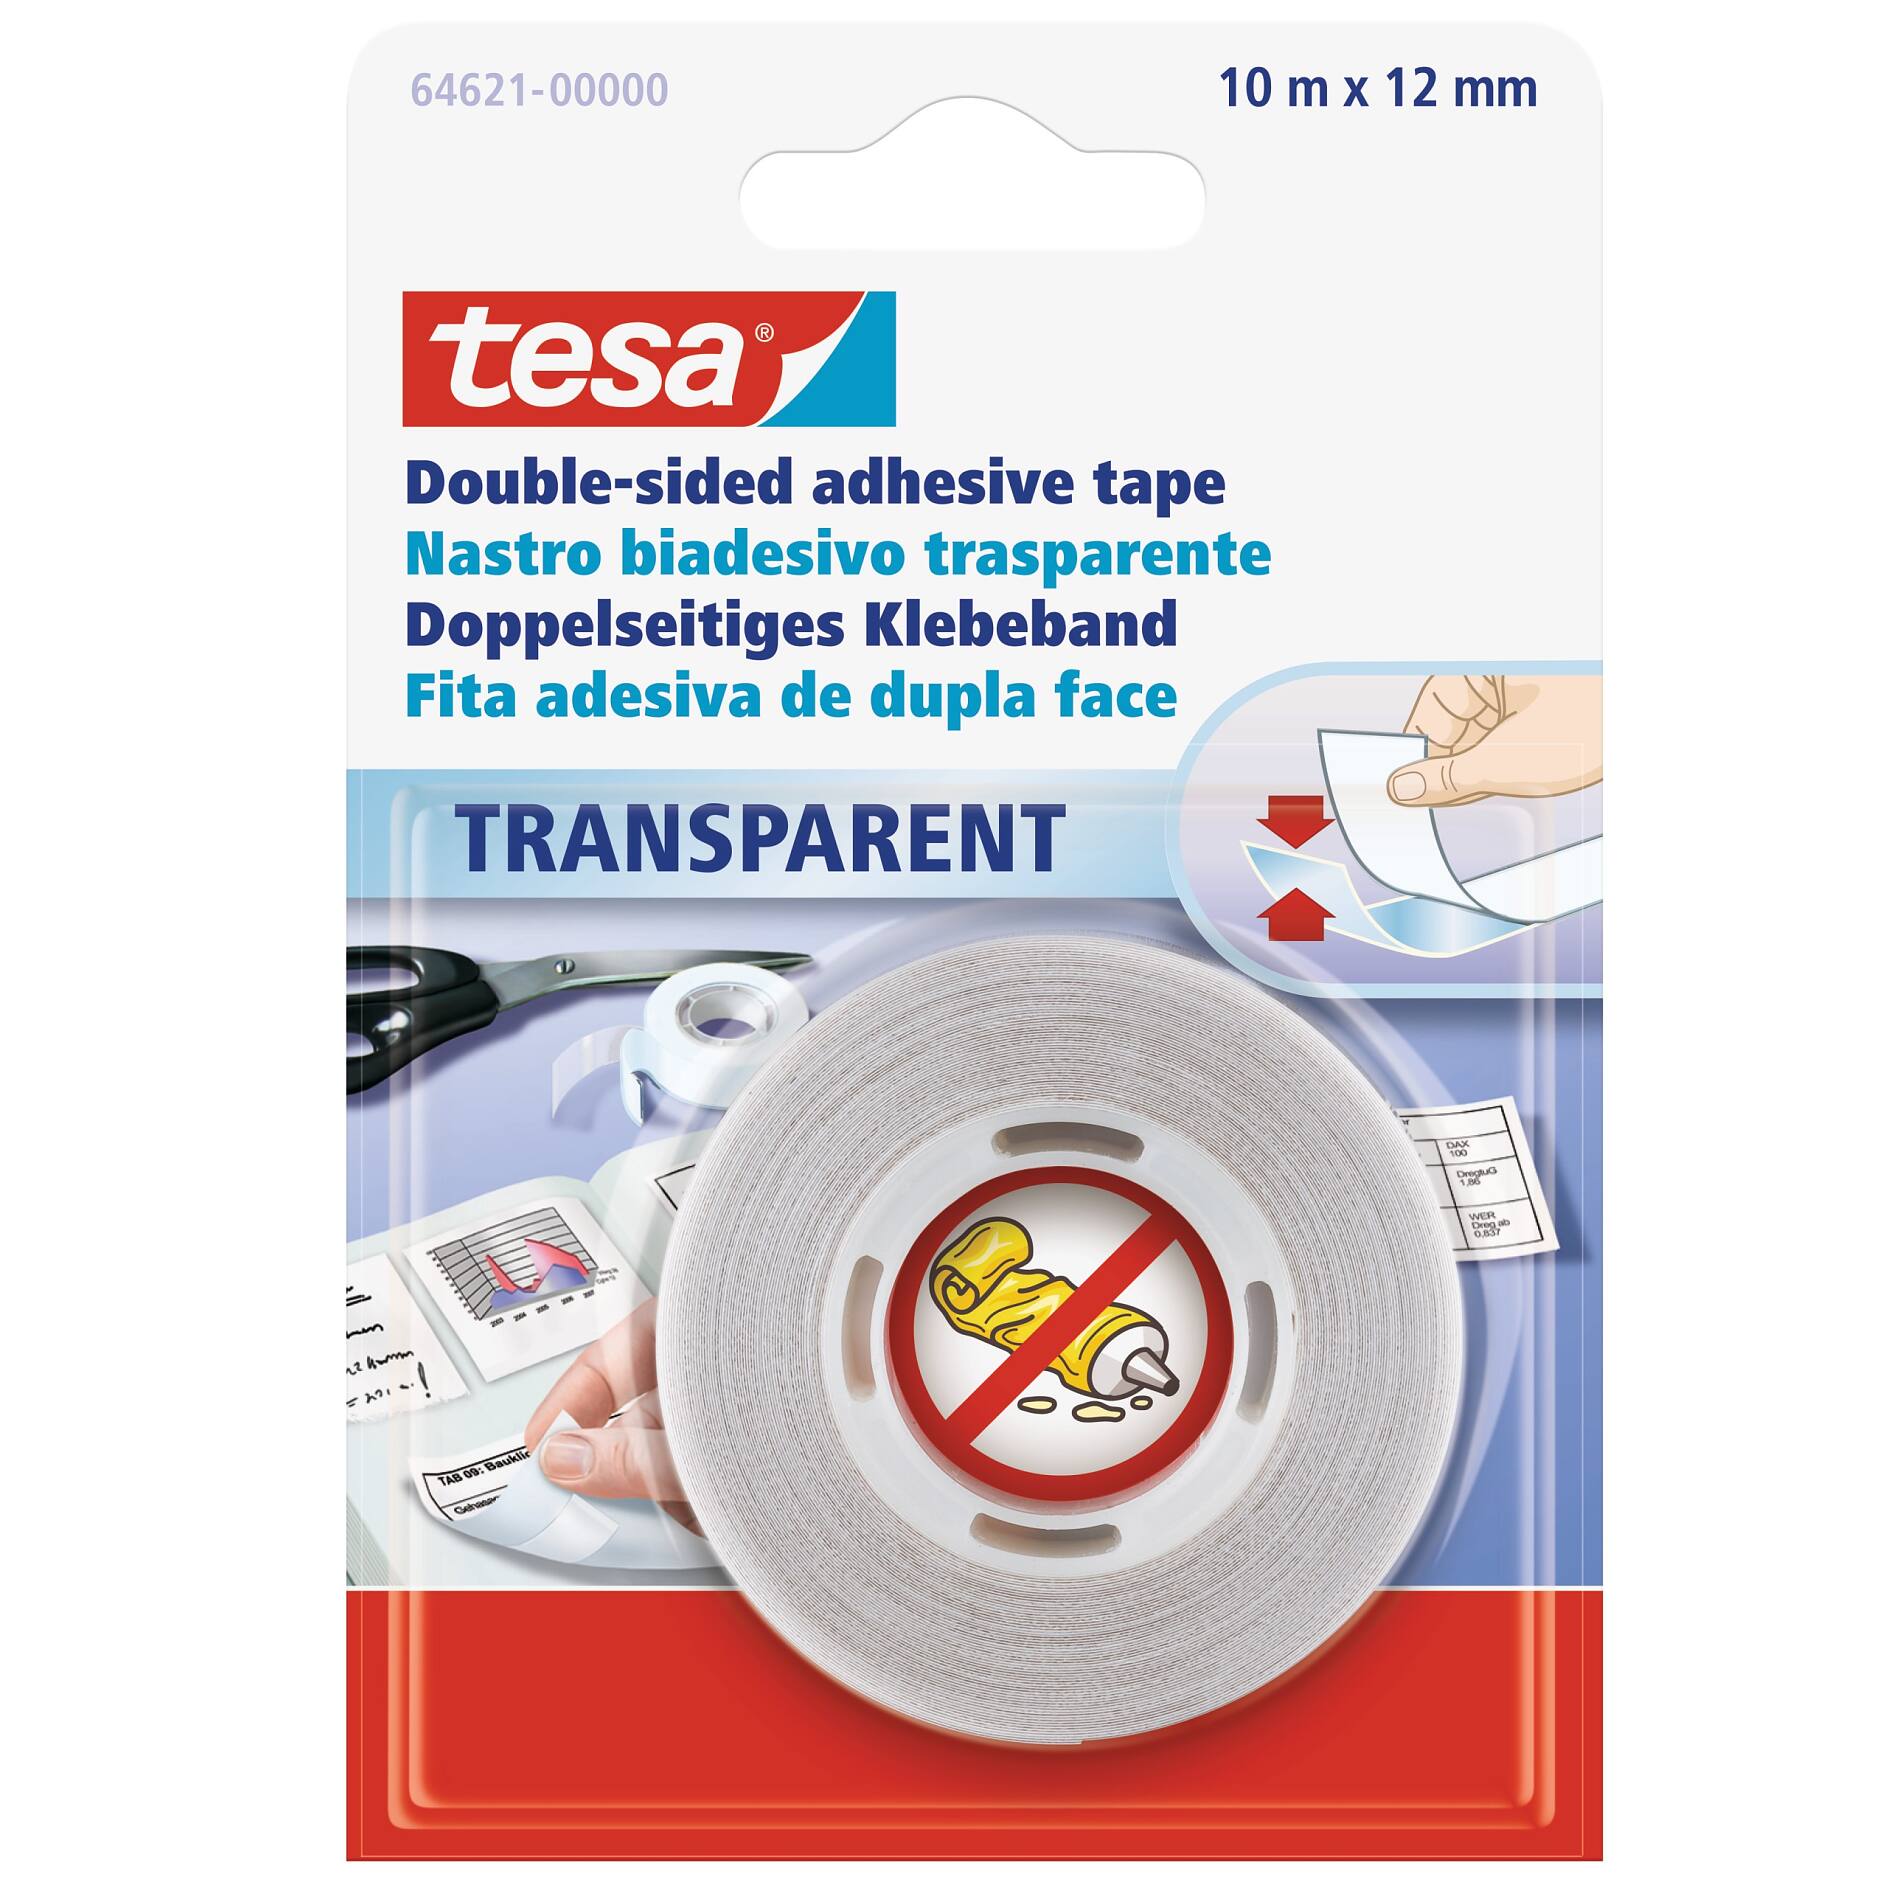 Tesa 51571 tesaFIX thin double-sided tape with woven backing - transparent  - rubber adhesive - 25 mm x 50 m x 0.16 mm - Per box of 48 tapes